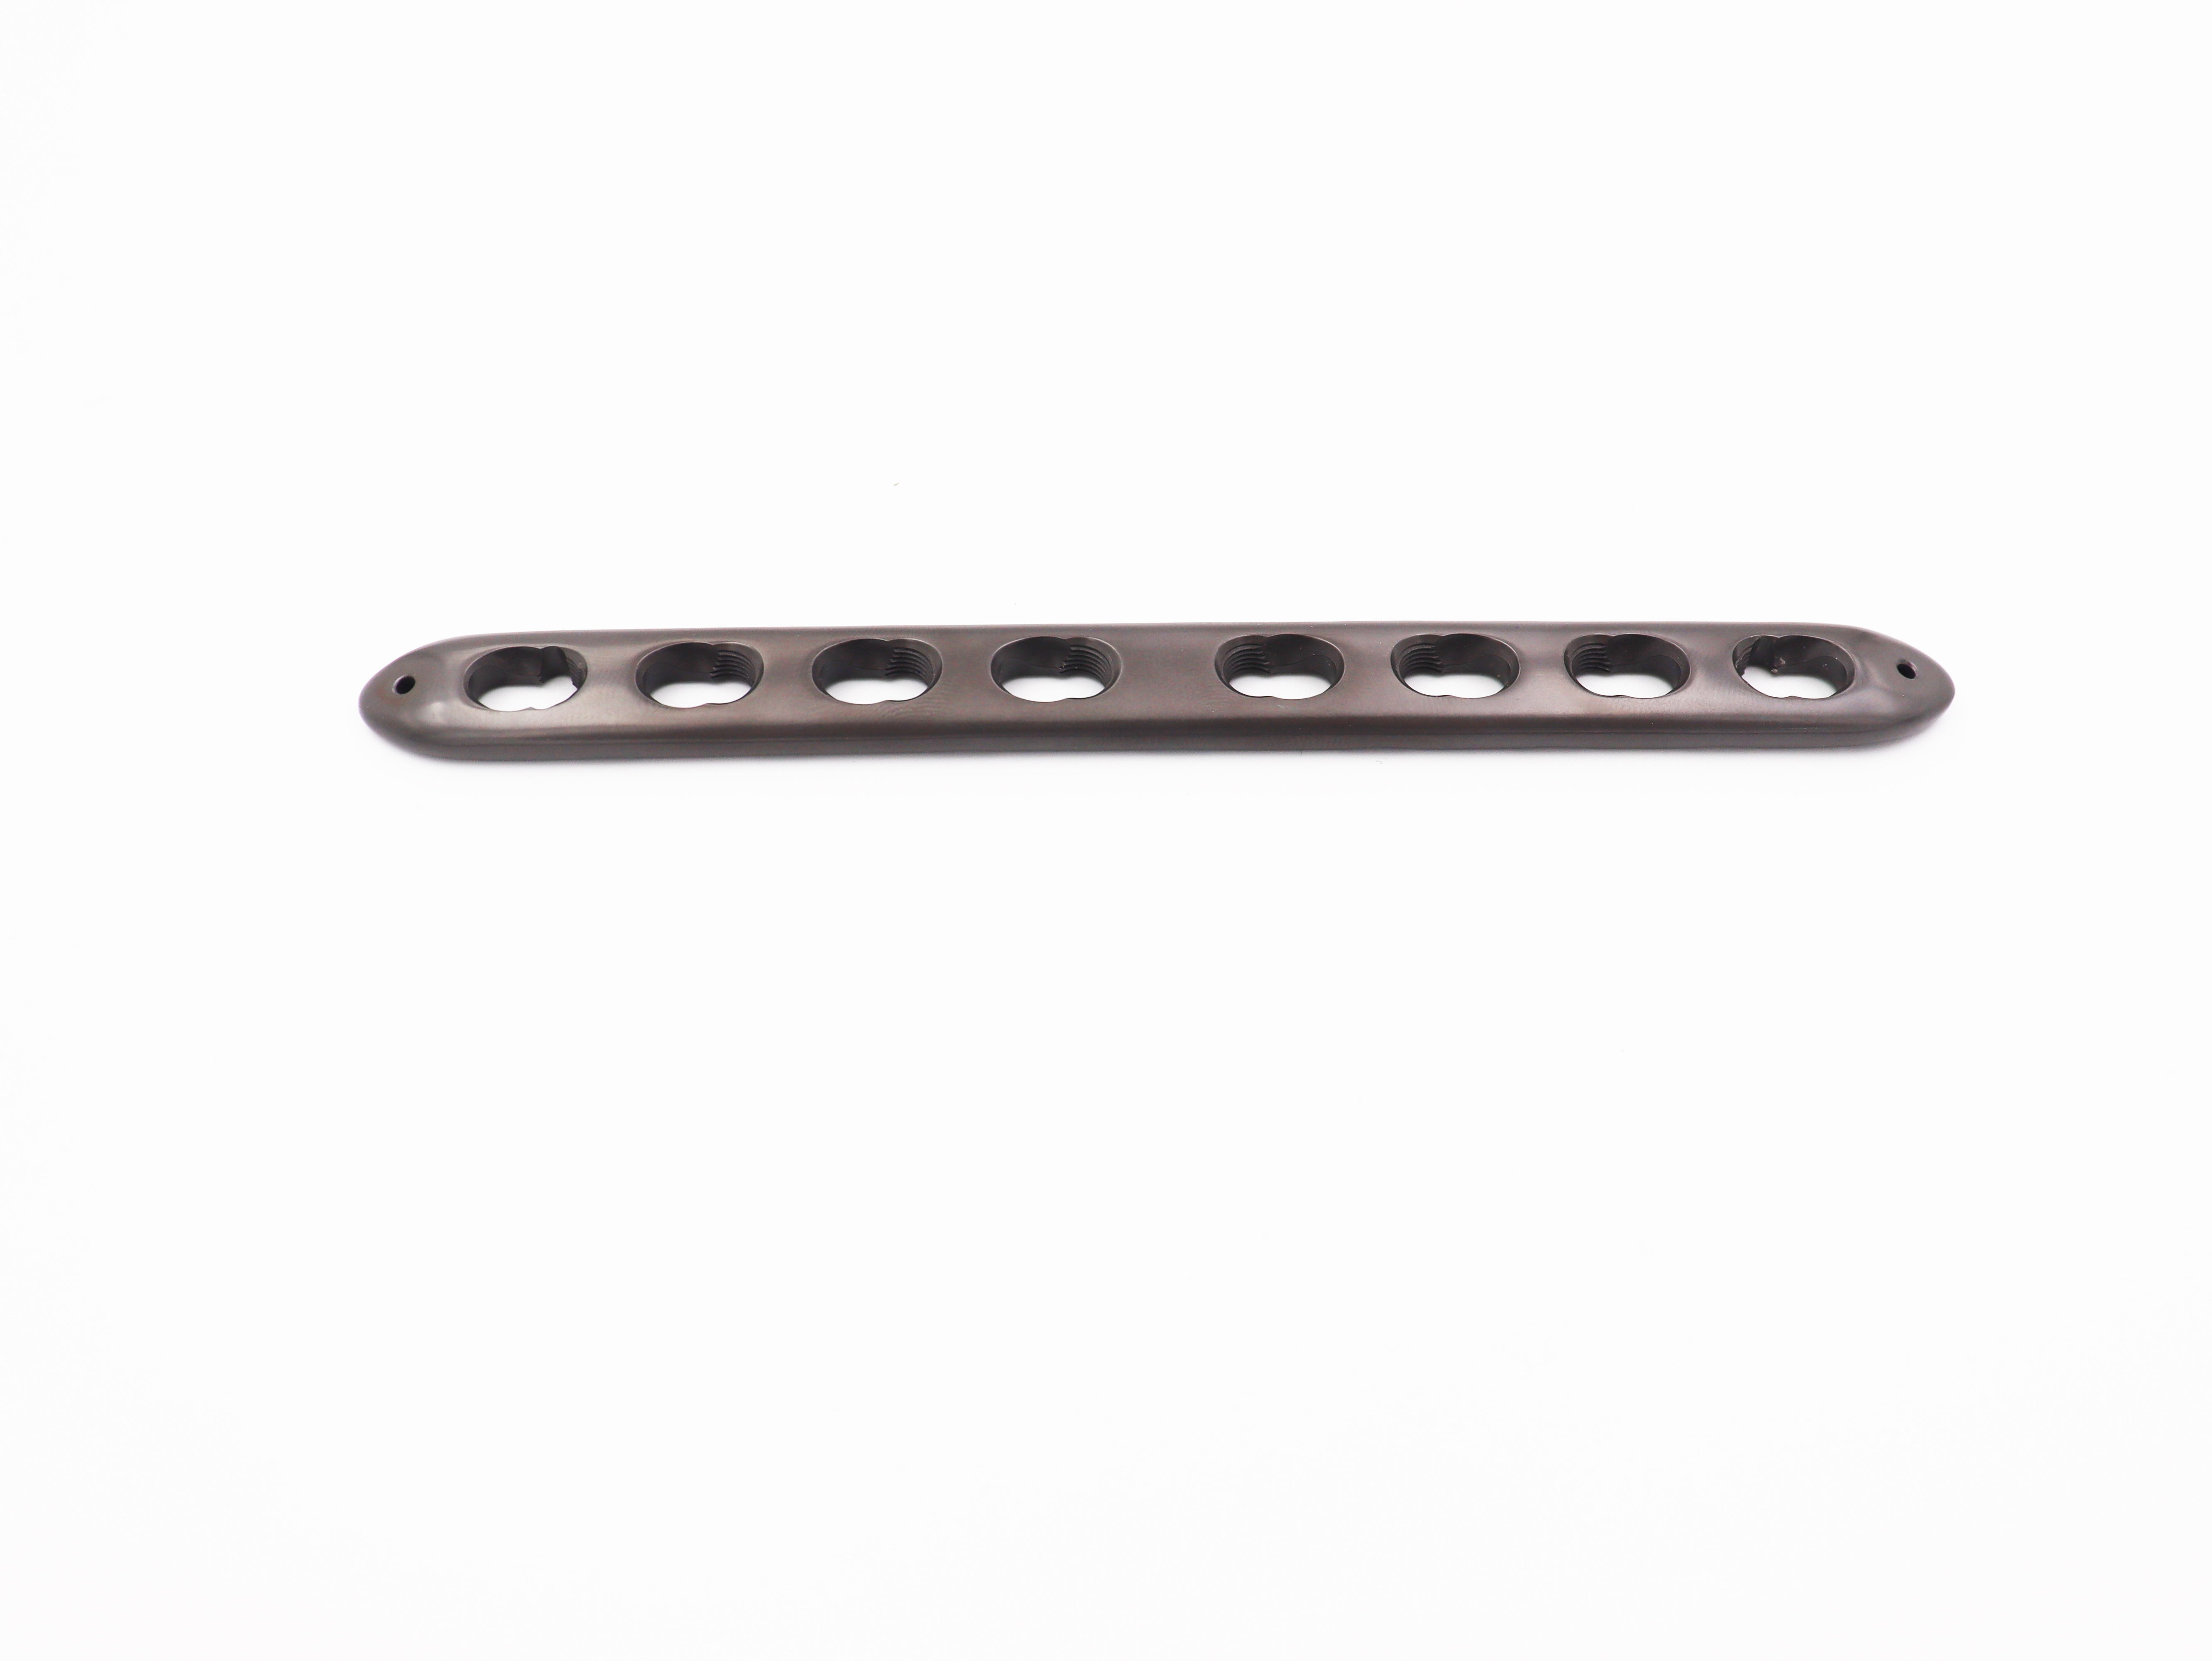 Hot selling Orthopedic Implants Multi-axial humeral titanium locking plate for Humerus 